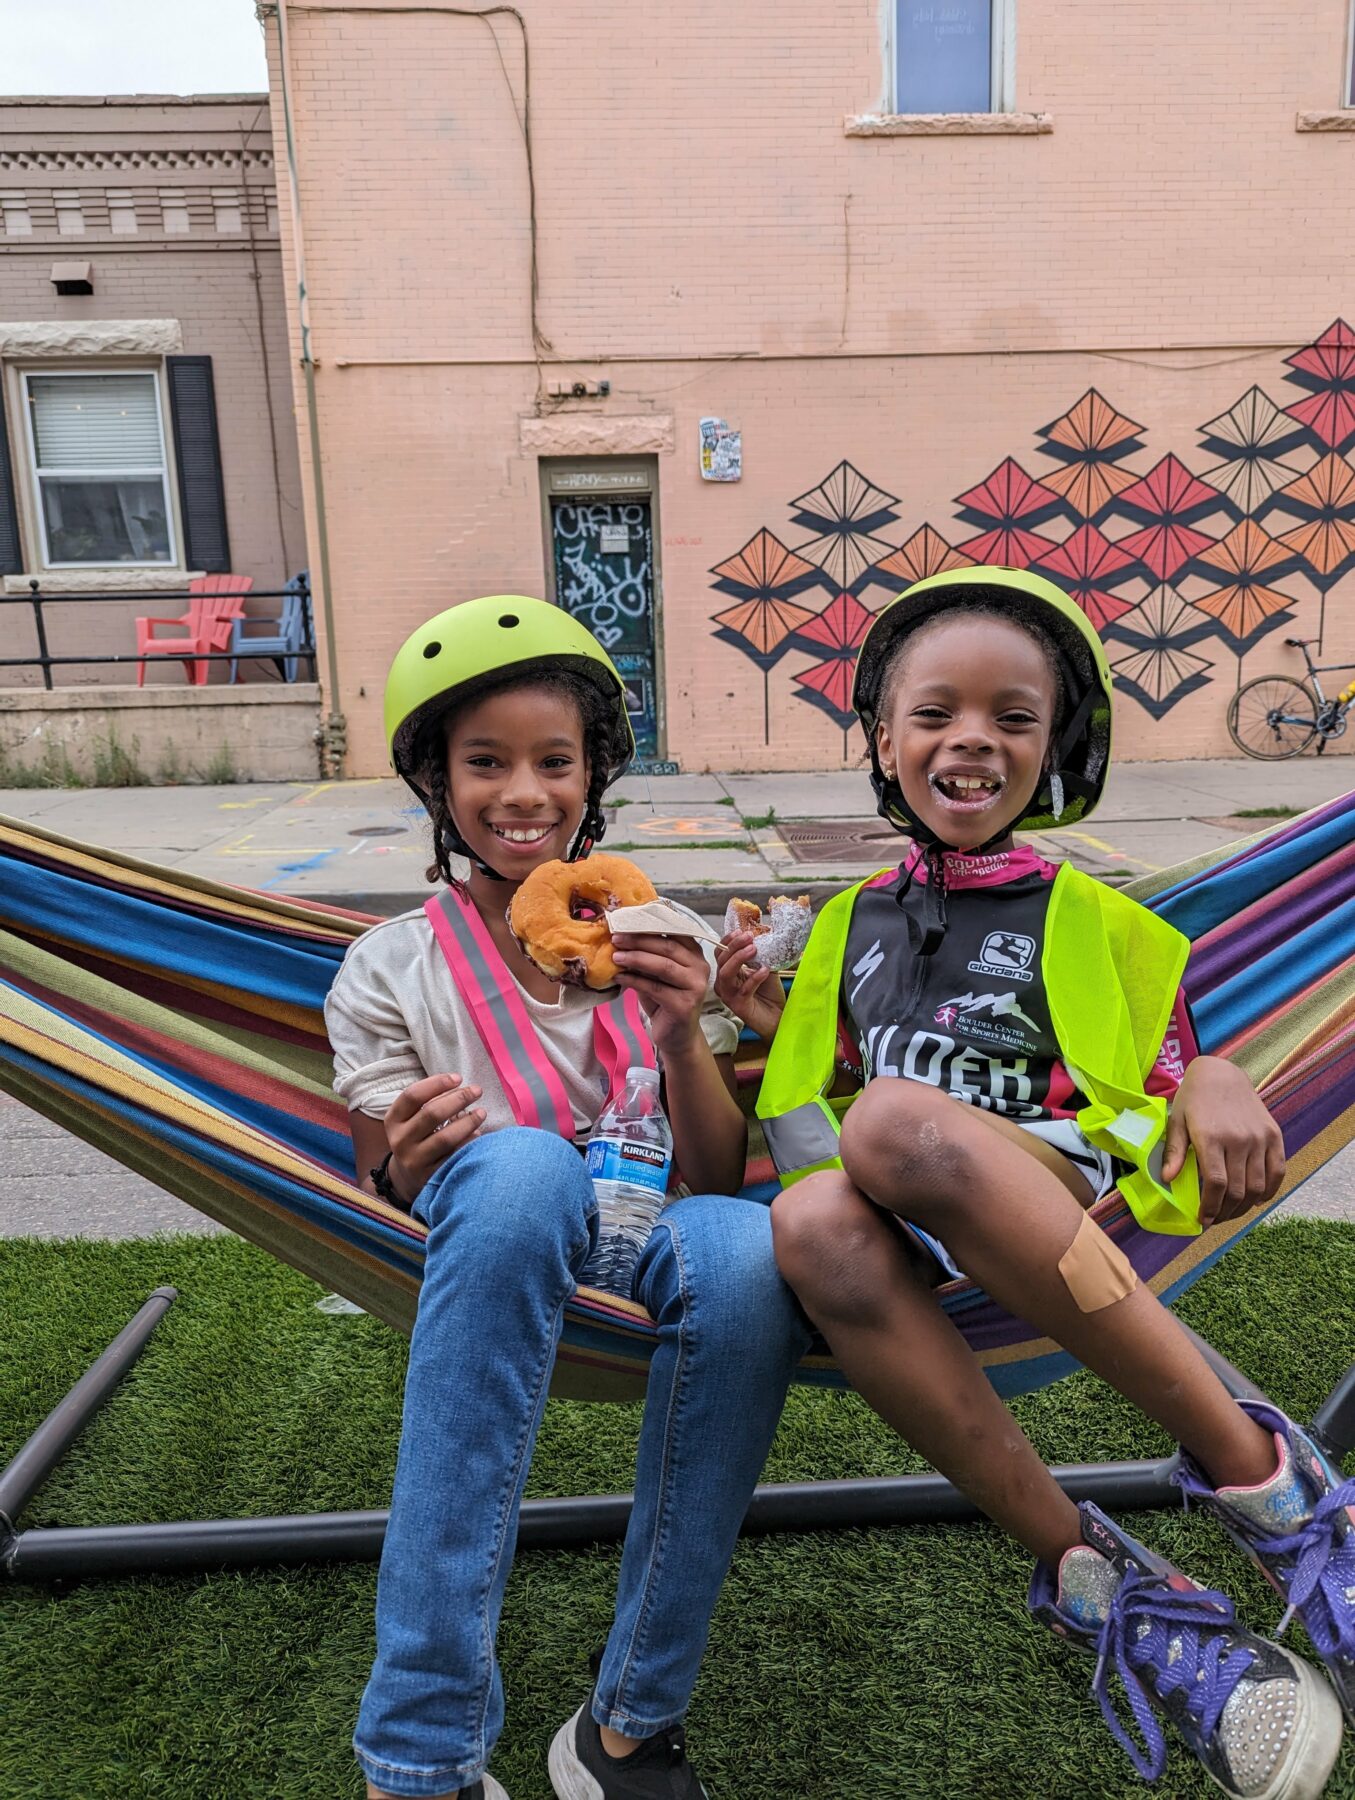 Two young cyclists smiling in a hammock